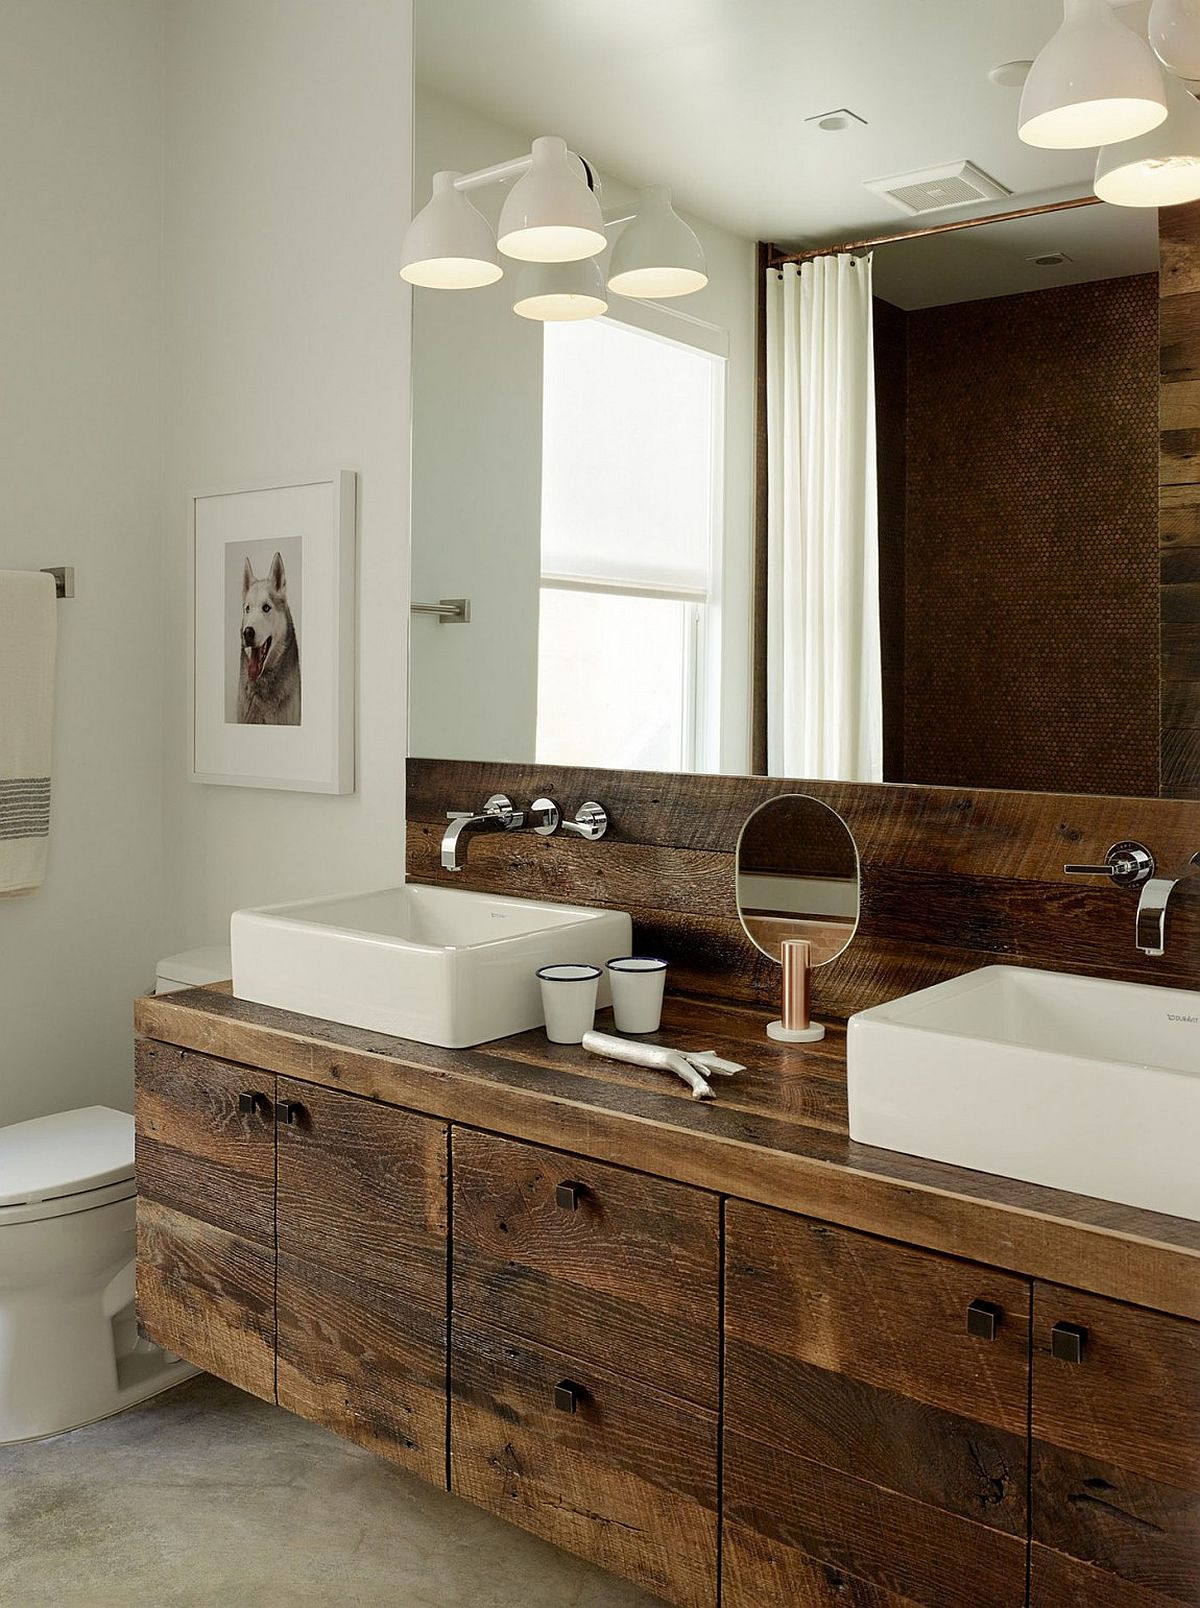 Bathroom Vanity Wood
 This Victorian Home in Noe Valley Acquires a Vibrant New